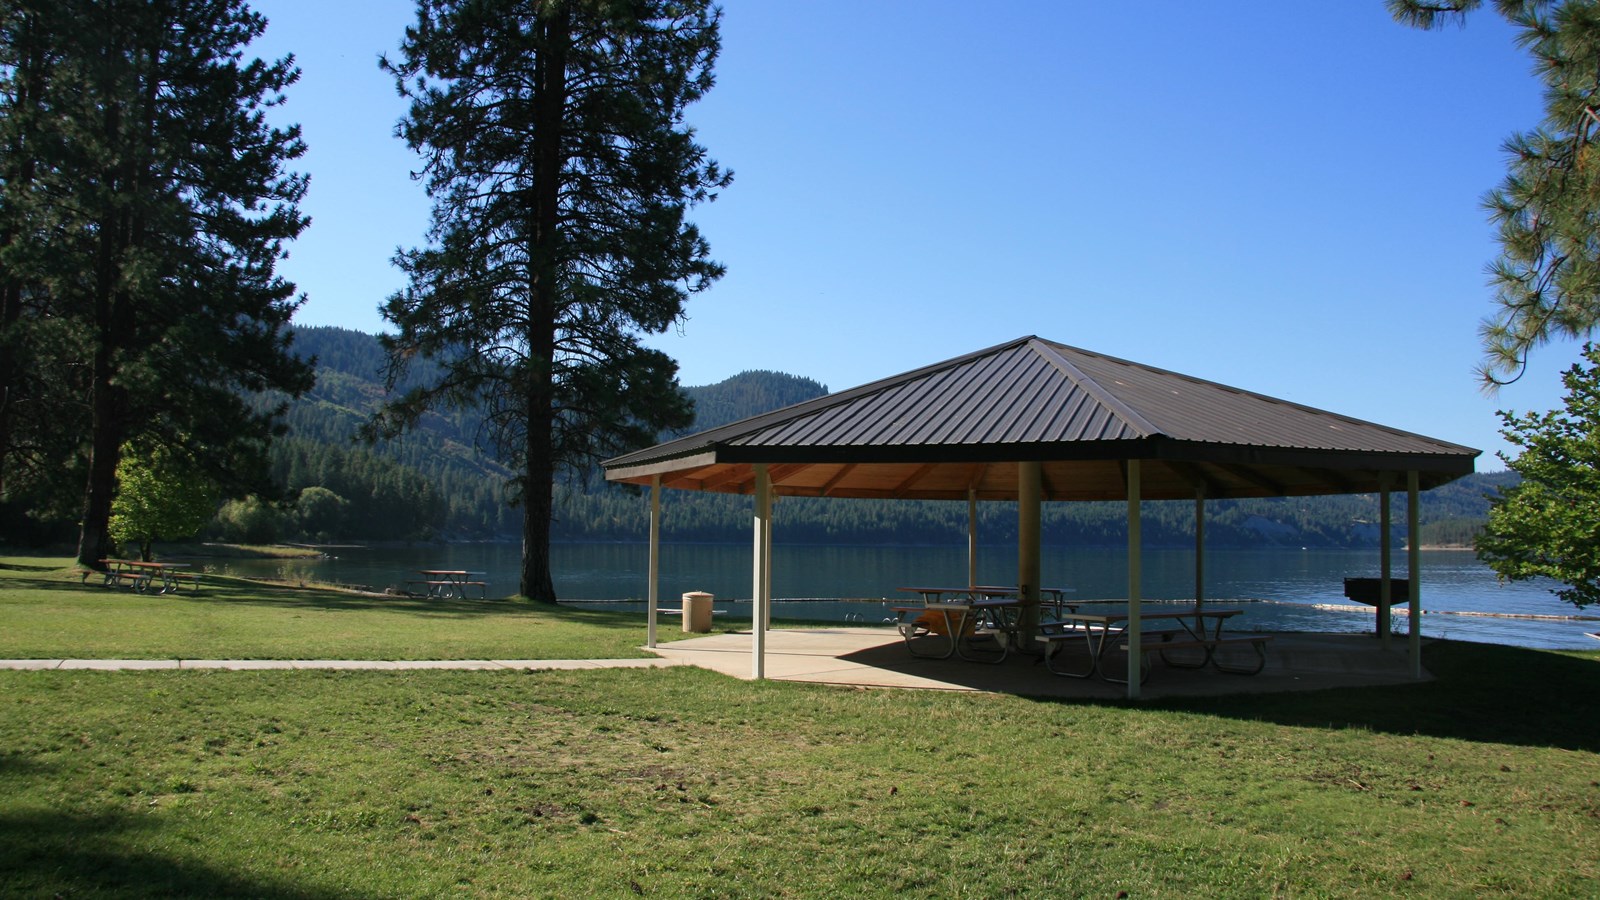 A roofed gazebo covers picnic tables and a grill adjacent to the lake.